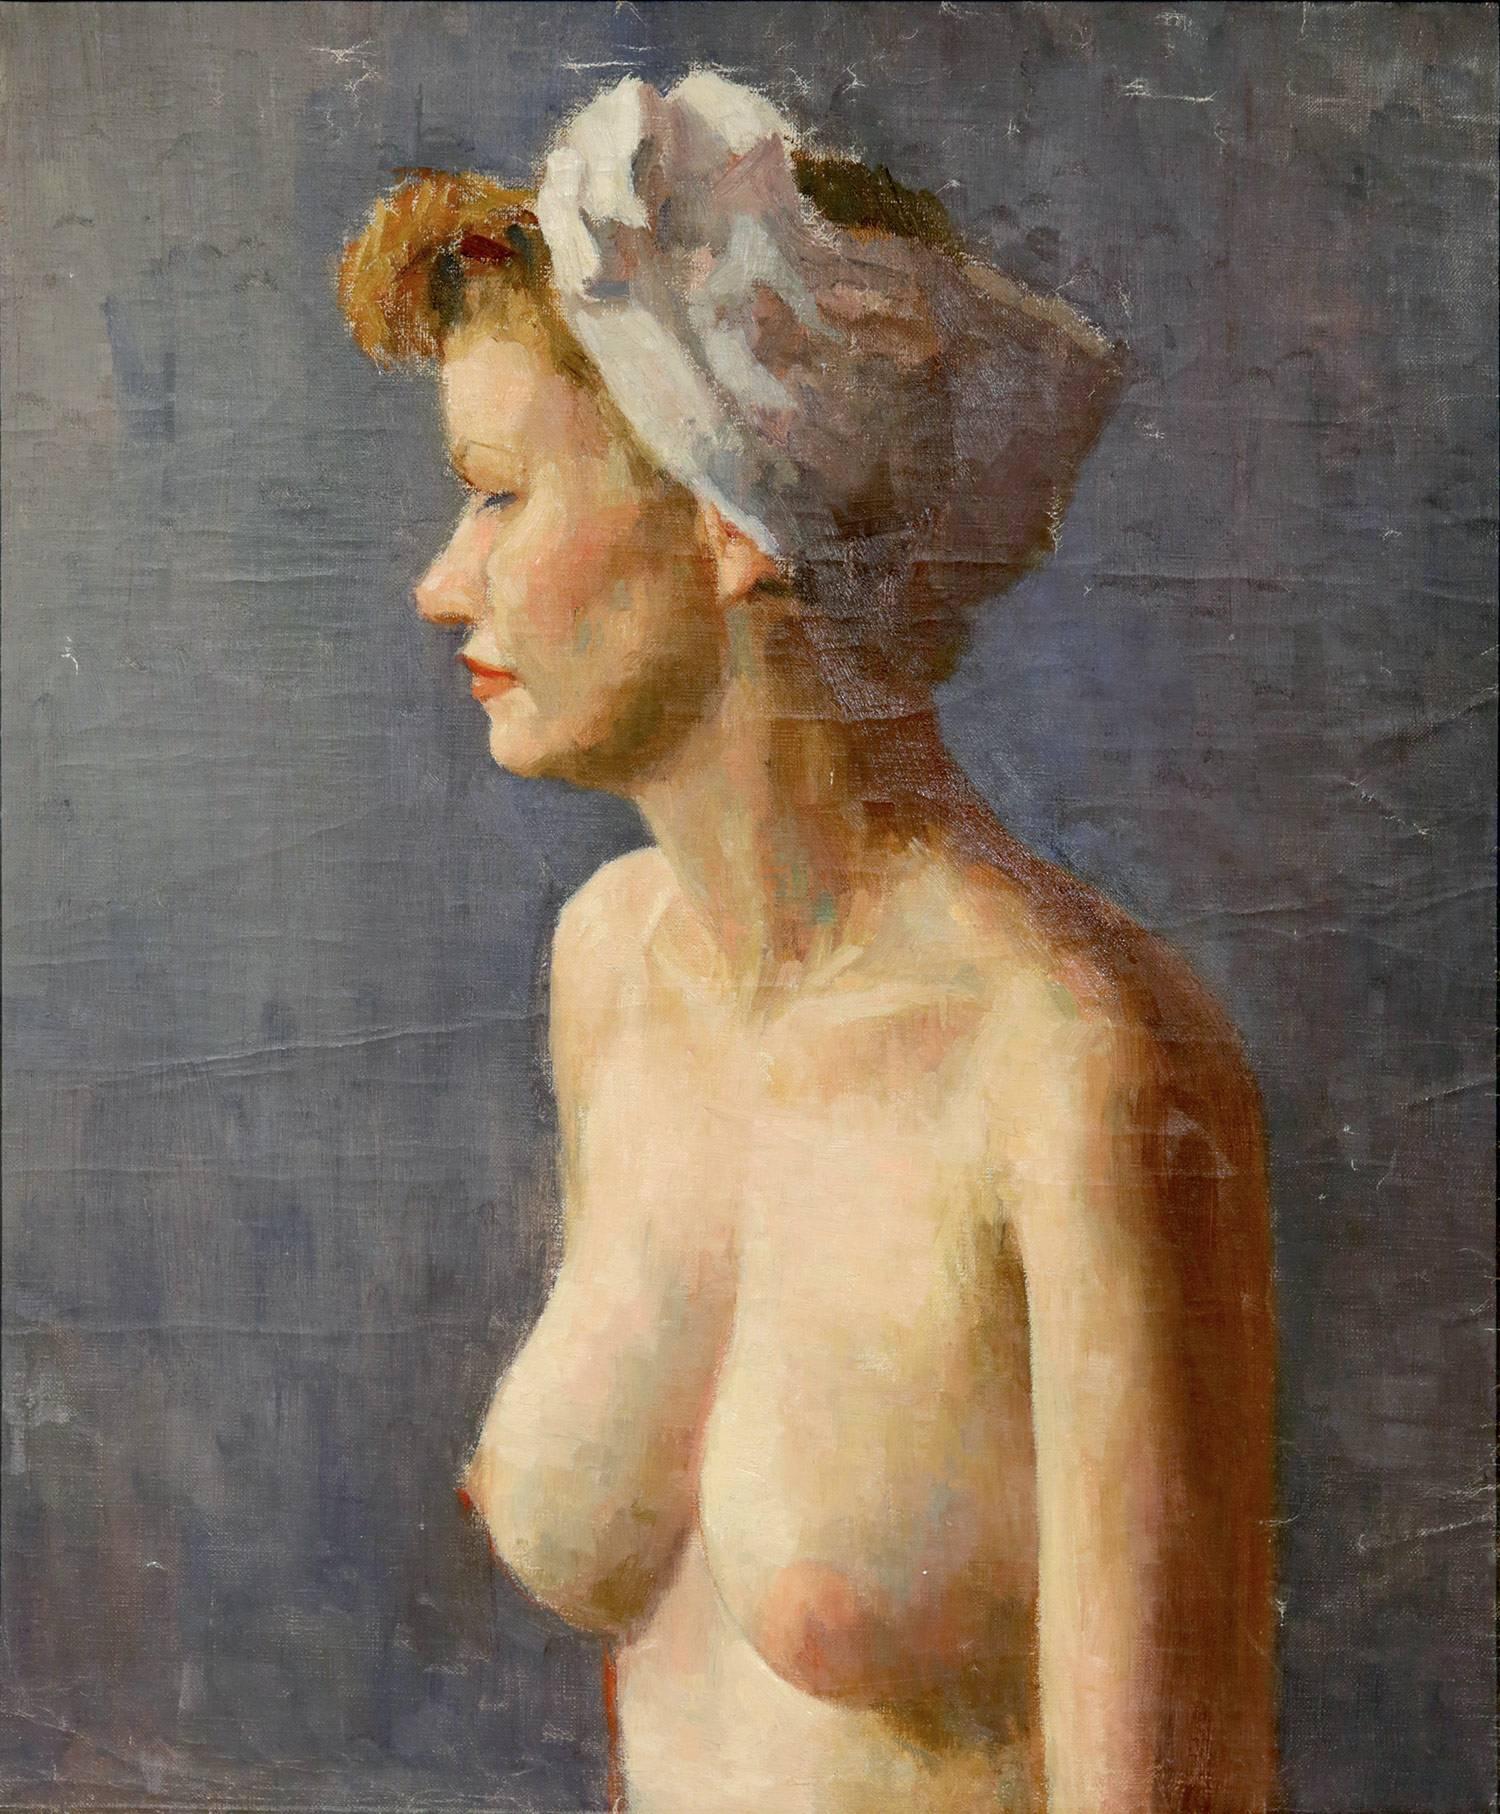 American 20th Century Oil Painting Nude Portrait of Woman from 1950's - Gray Figurative Painting by Robert Freiman